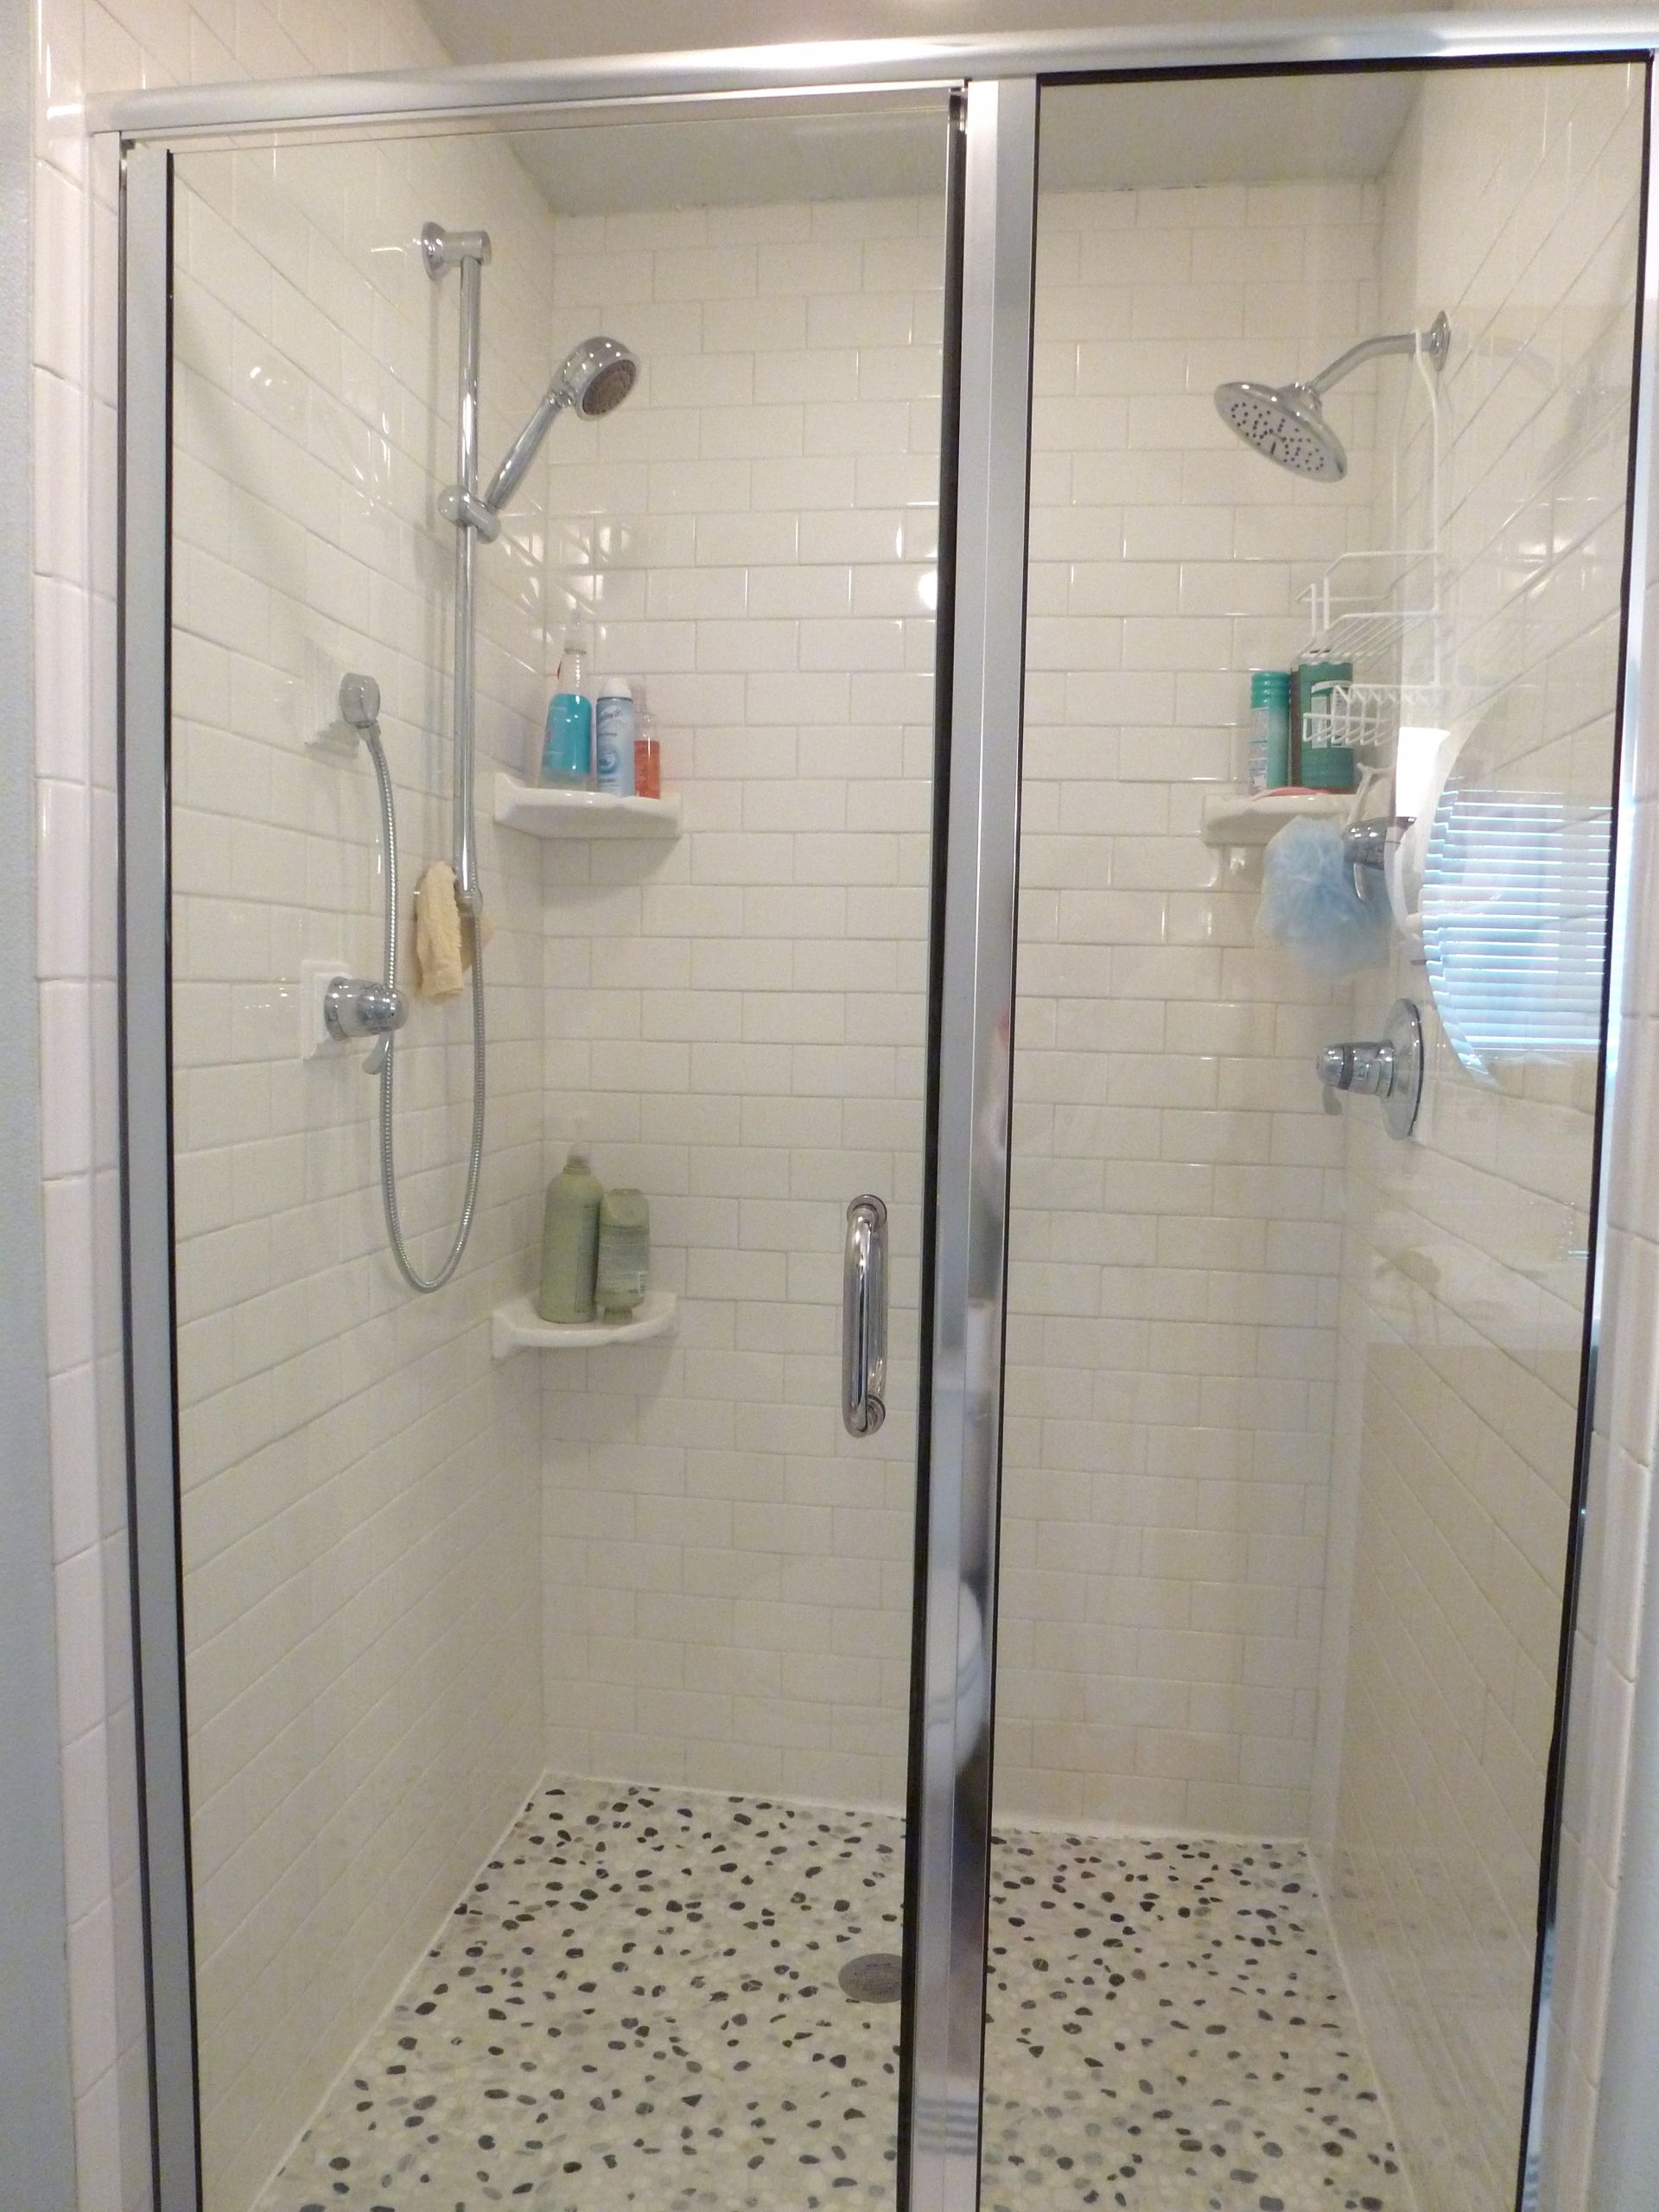 Home Depot Bathroom Shower Tile
 33 amazing ideas and pictures of modern bathroom shower